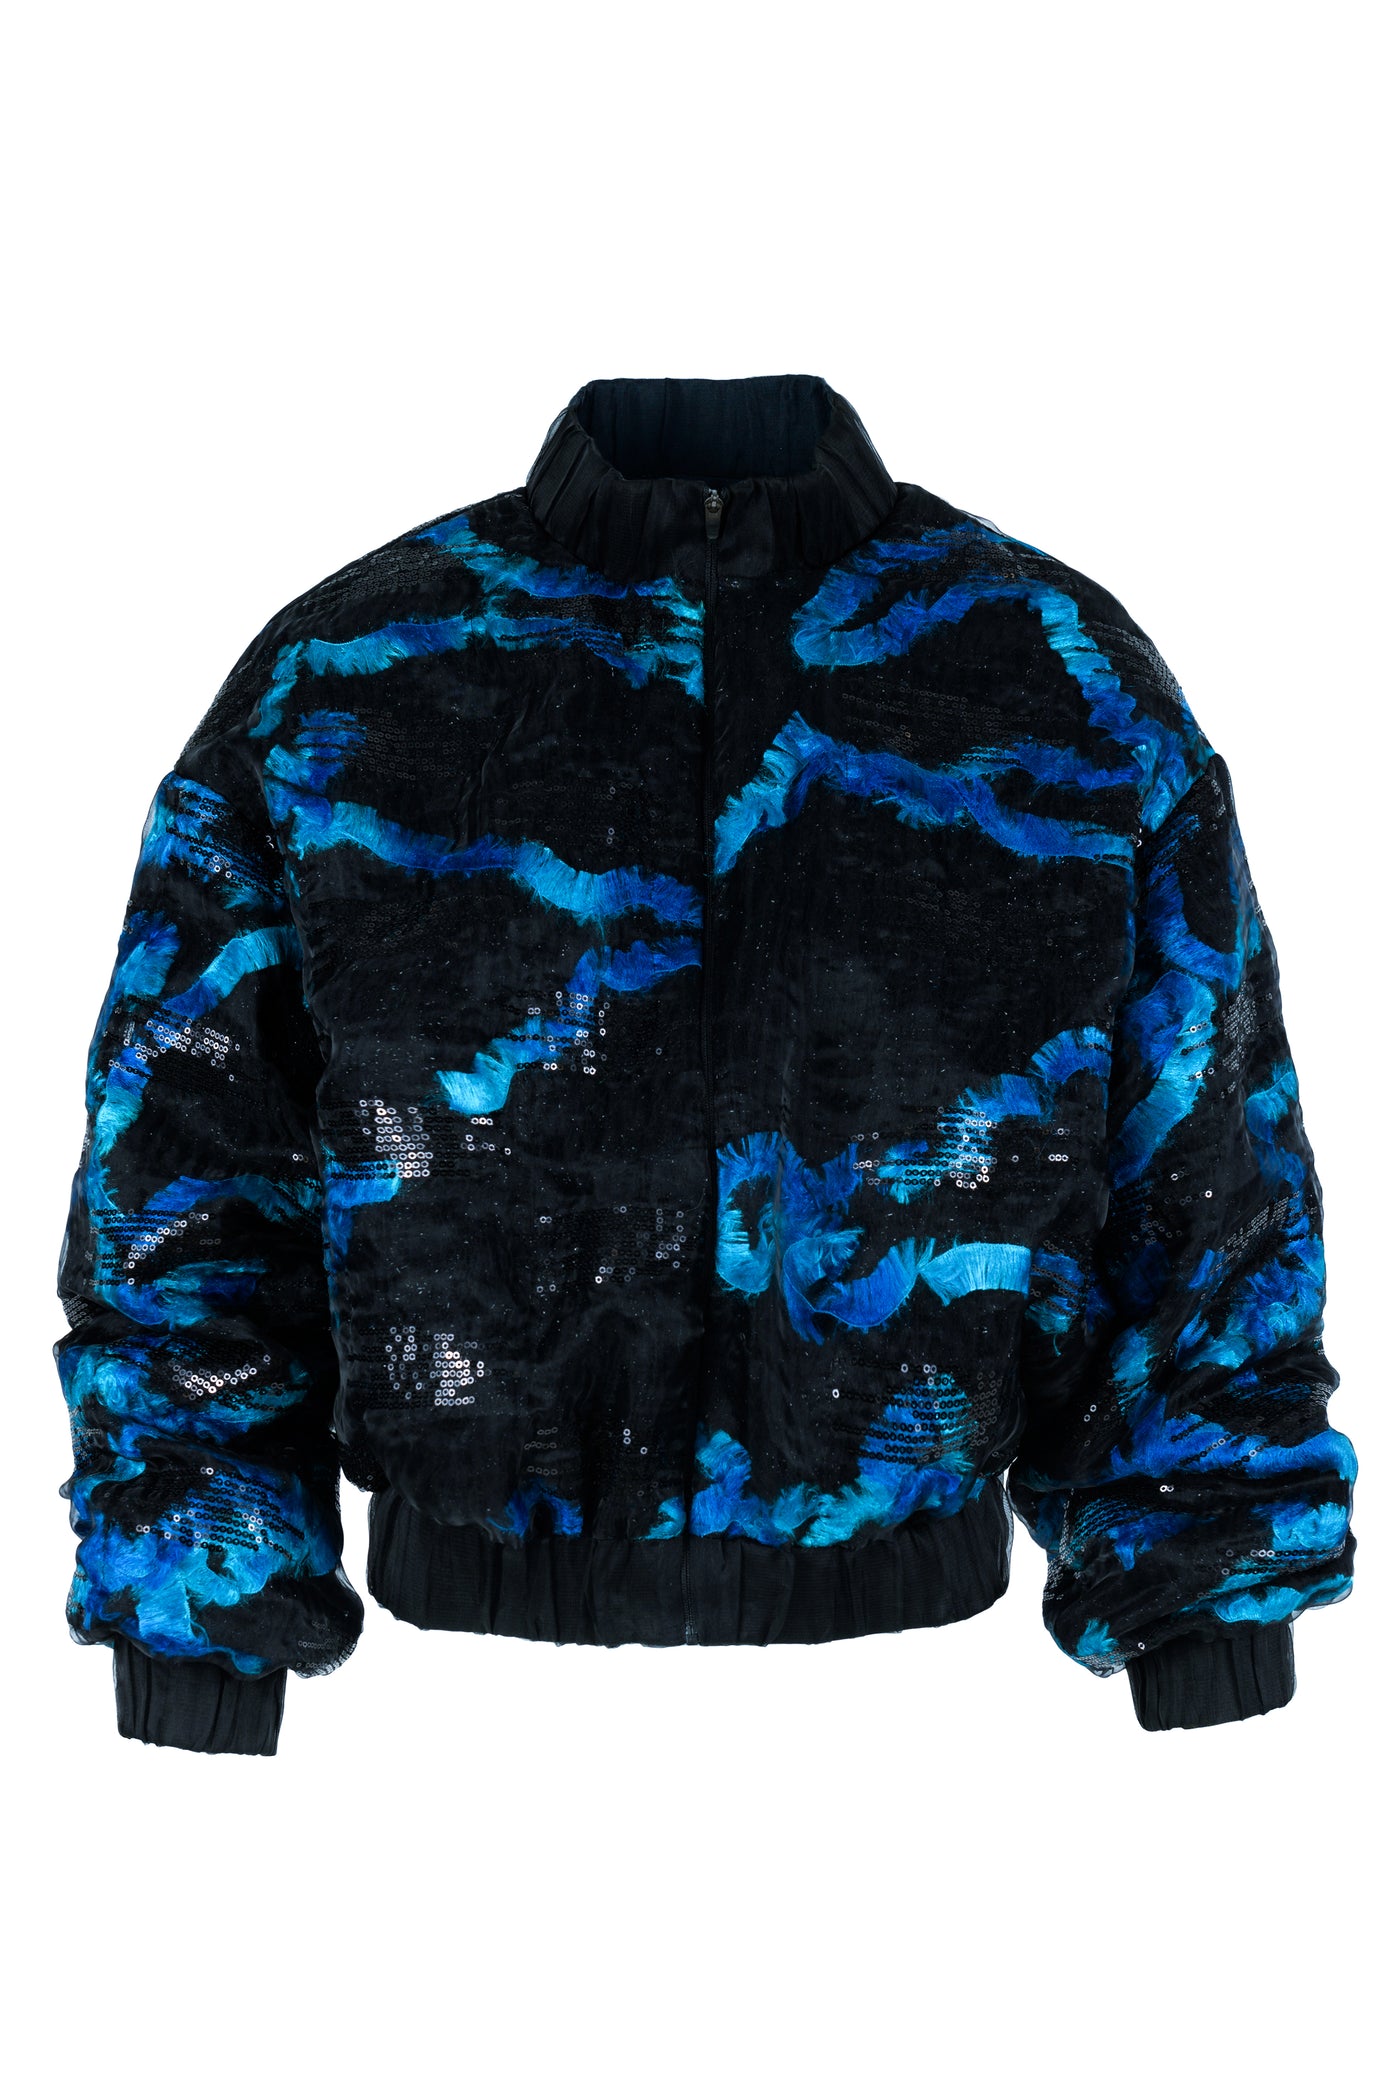 Blue and Black Sequin Bomber